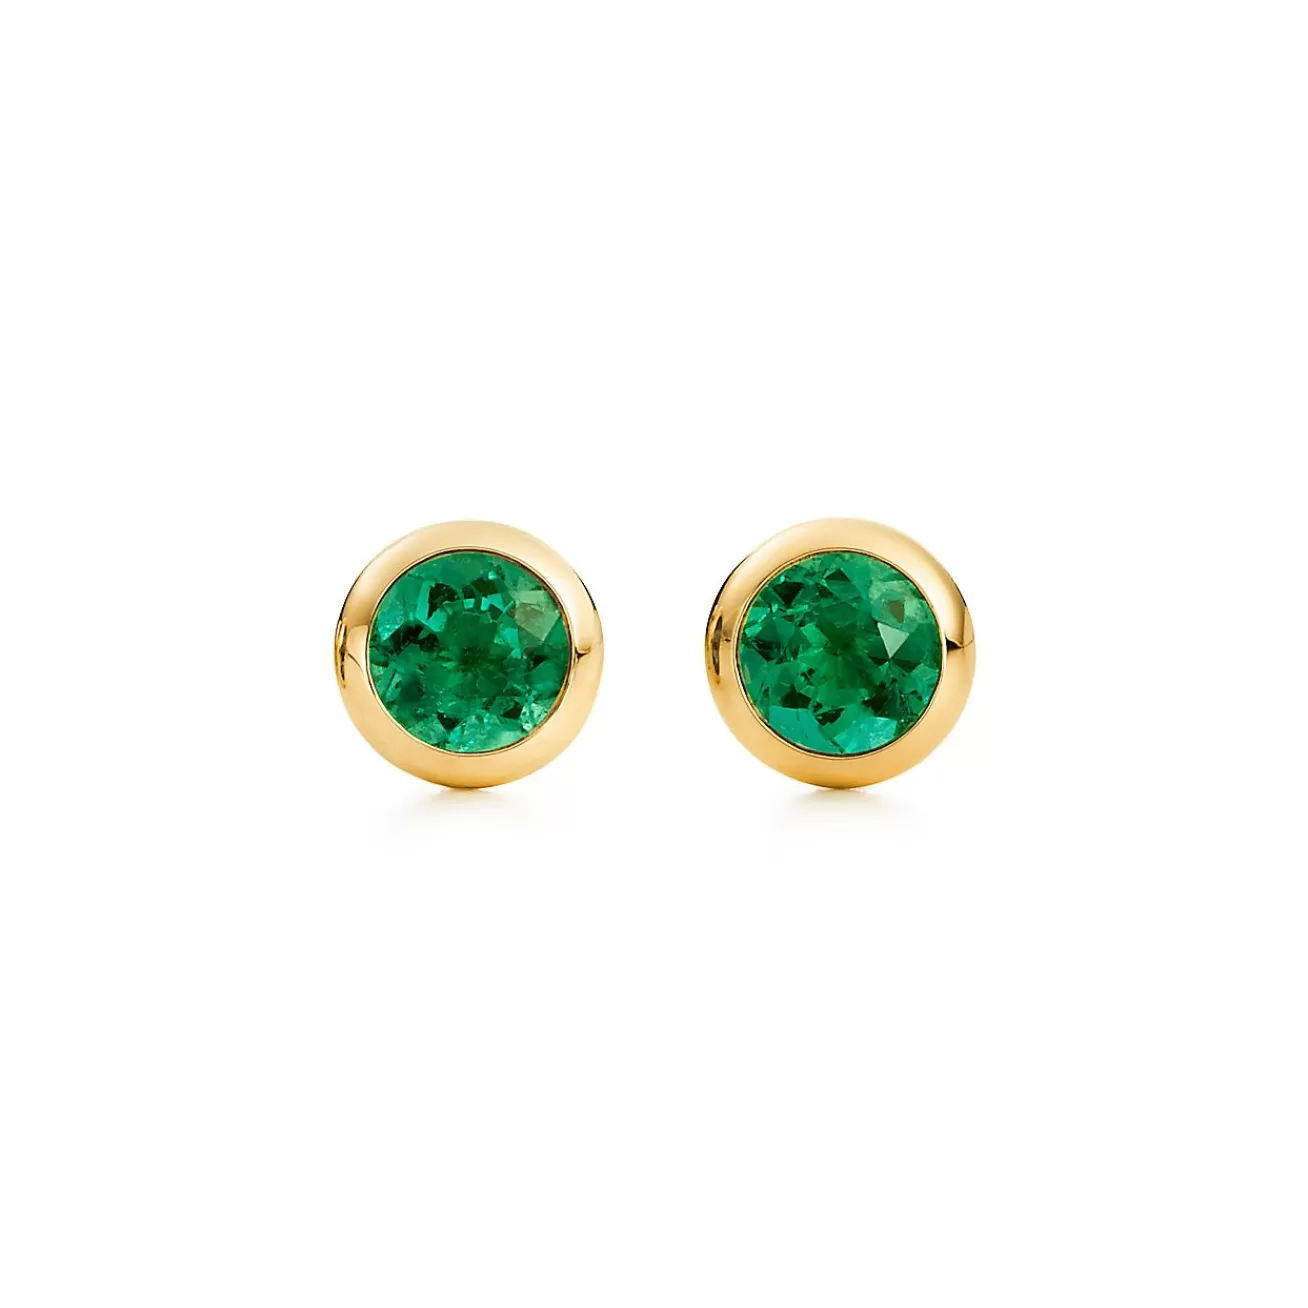 Tiffany & Co. Elsa Peretti® Color by the Yard earrings in 18k gold with emeralds. | ^ Earrings | Gold Jewelry